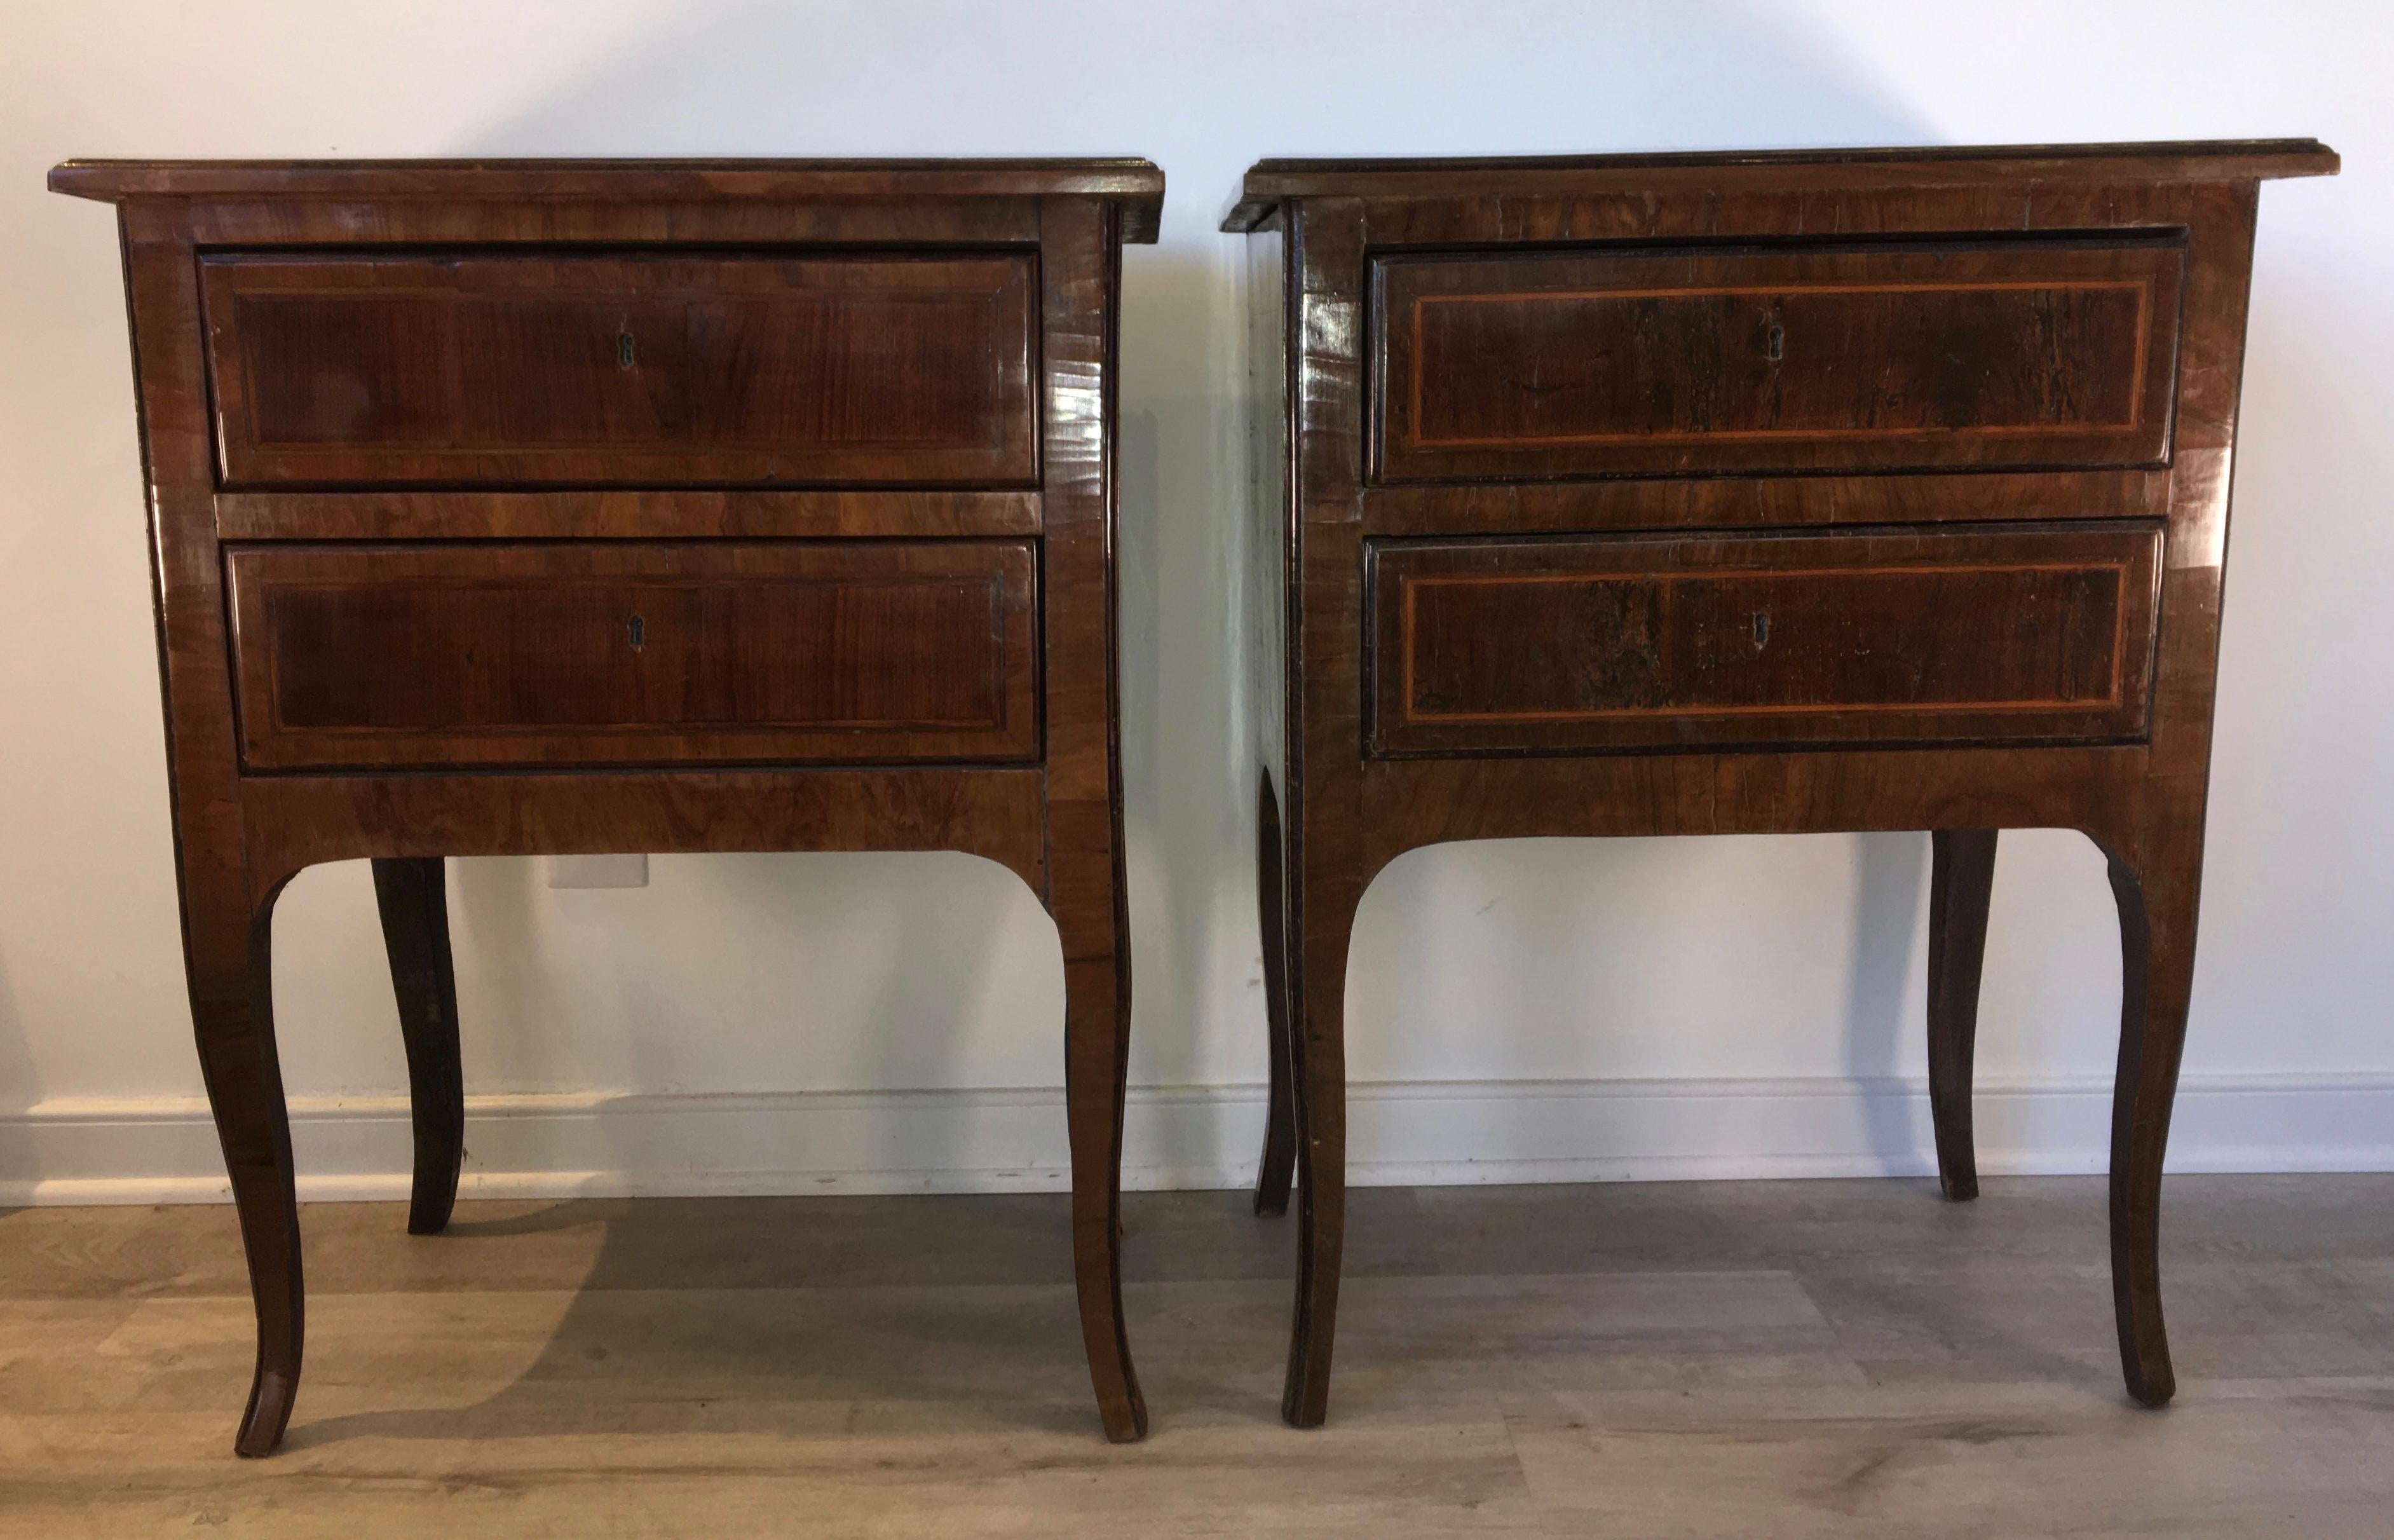 Pair of elegant 18th century Italian Commodinis, circa 1770. Kingwood parquety and other exotic woods, two drawers over a shaped skirt on cabriole legs. These stands or 